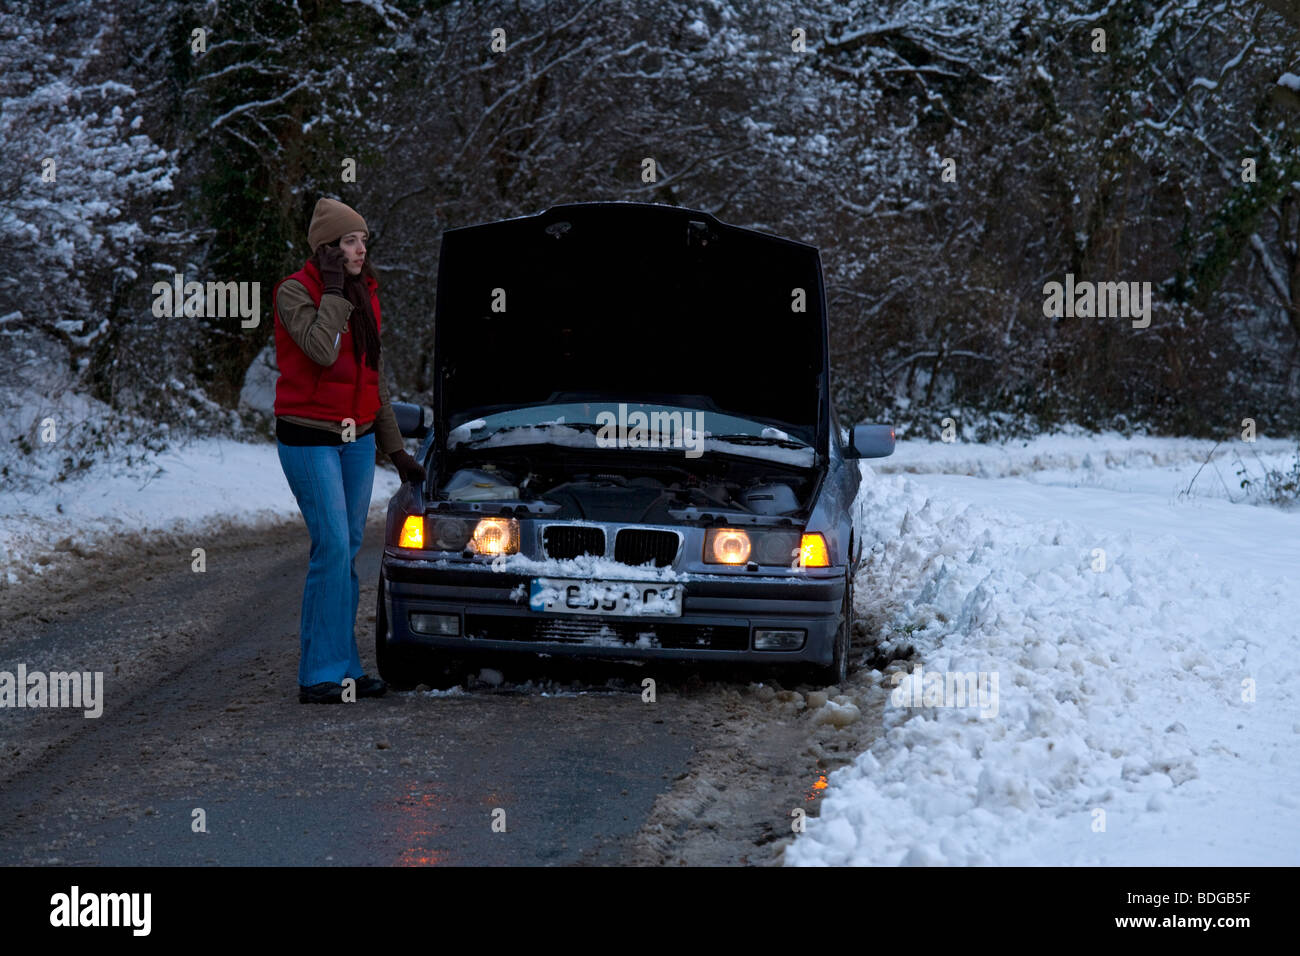 Women on her own broken down in the snow, stranded trying to get it fixed on mobile phone ringing rescue service at night. Stock Photo